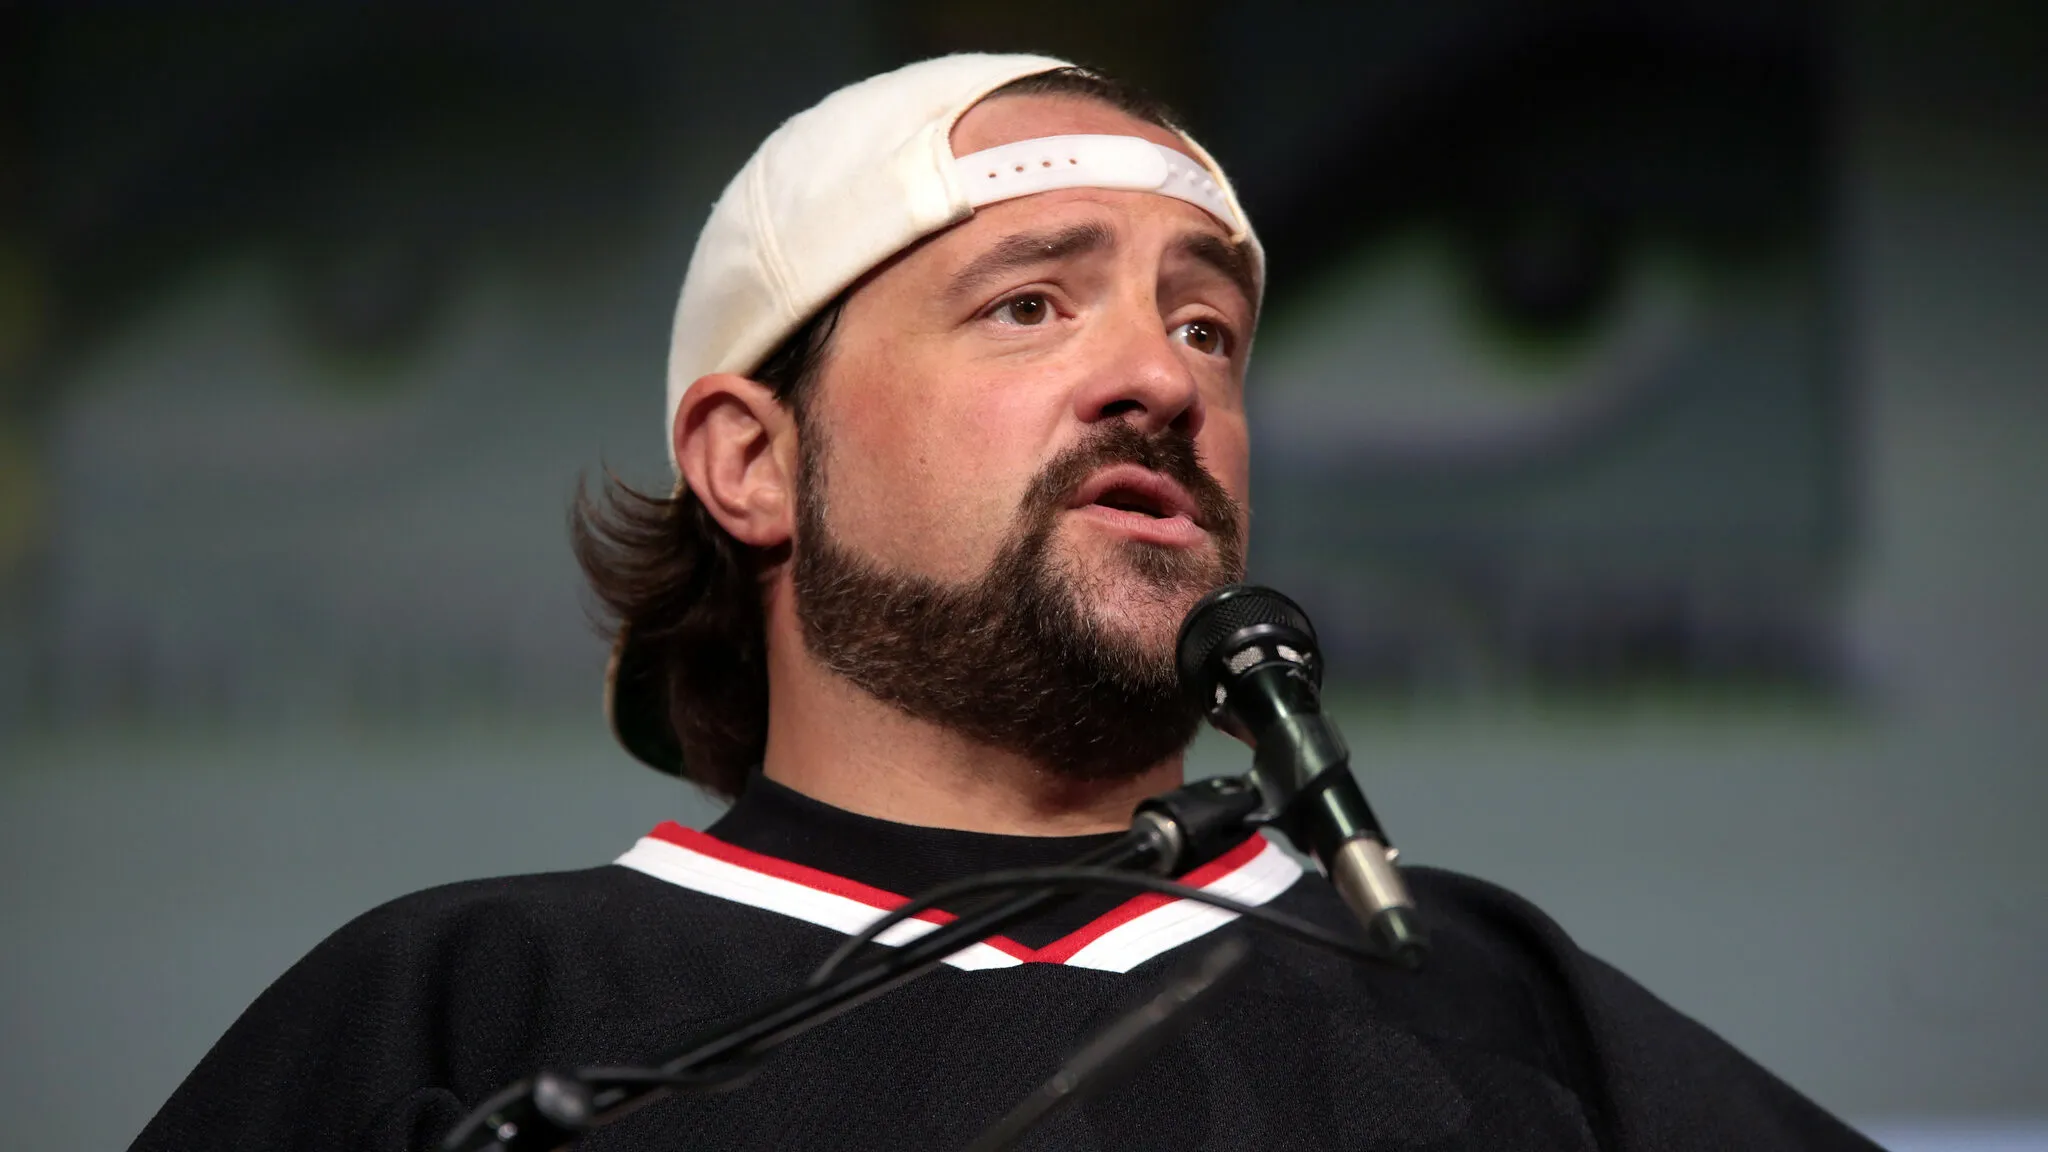 Kevin Smith celebrates the other half of Jay and Silent Bob marking 13 years of sobriety